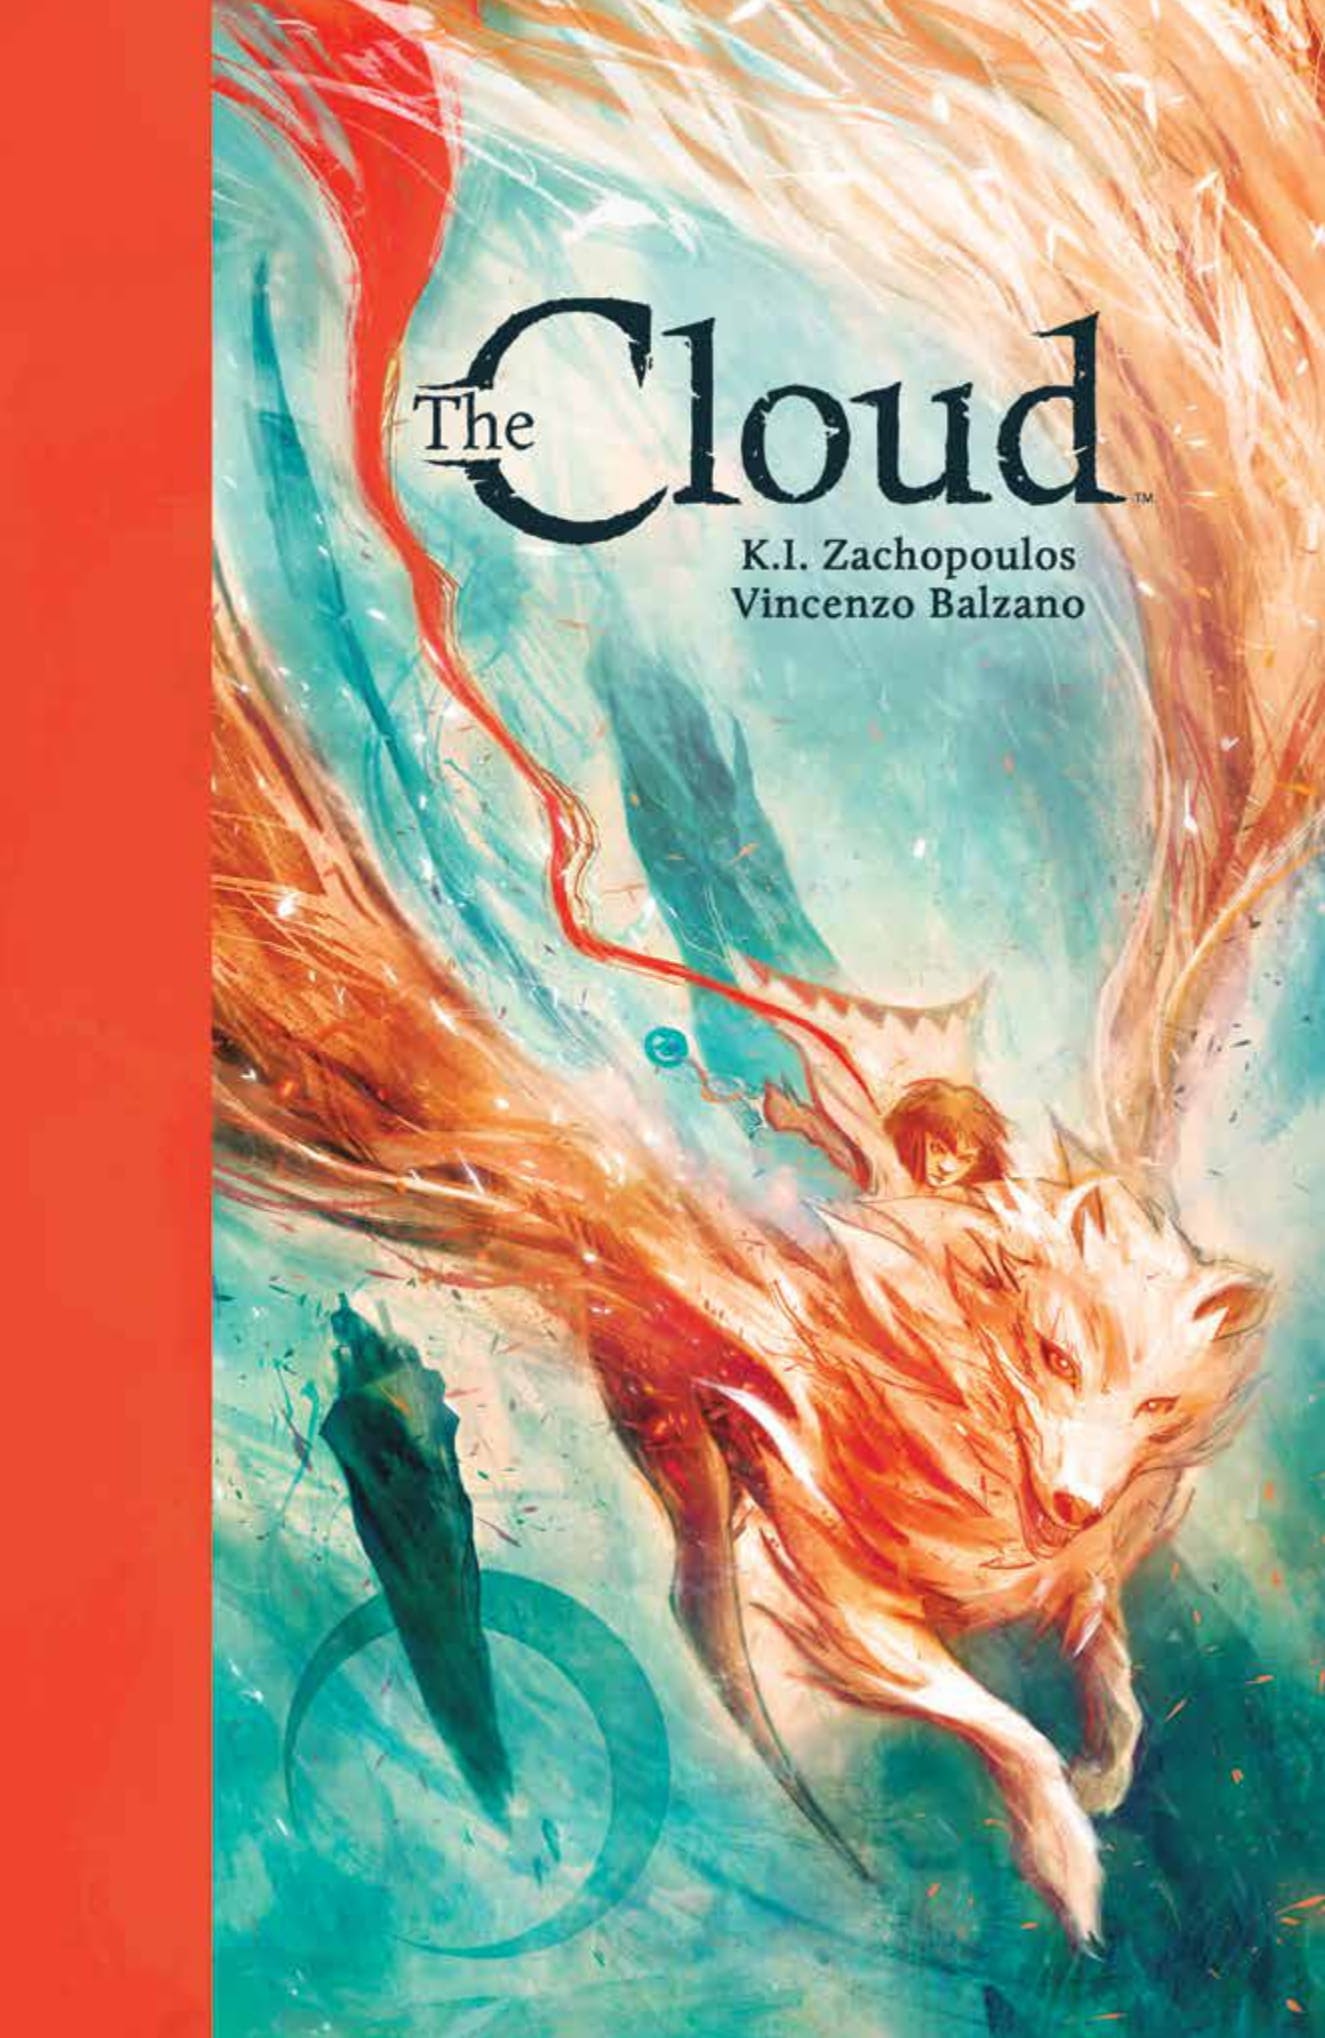 Read online The Cloud comic -  Issue # TPB - 1